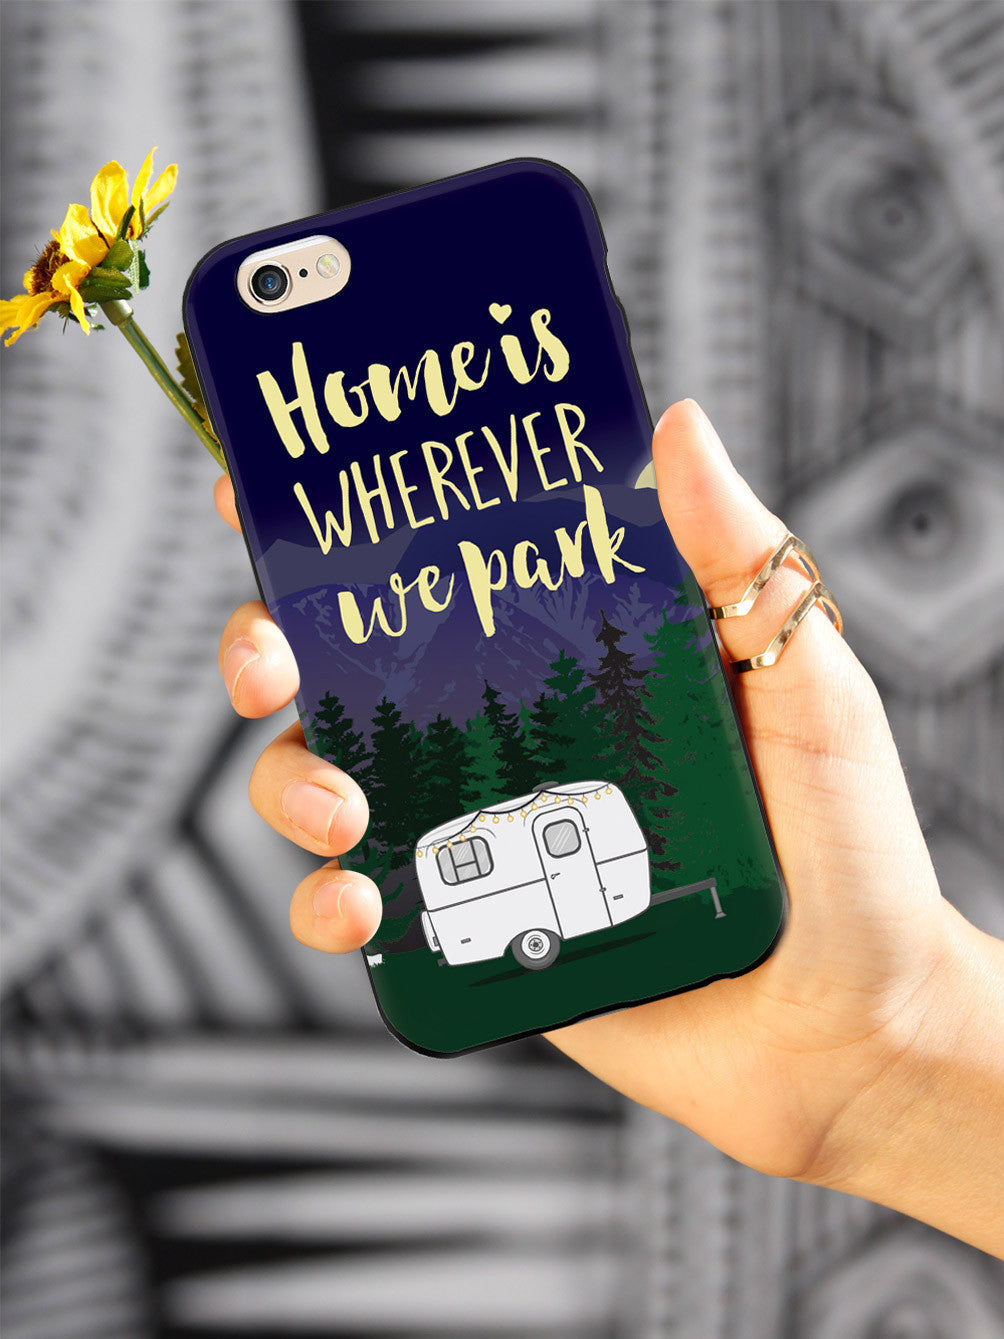 Home Is Wherever We Park Case